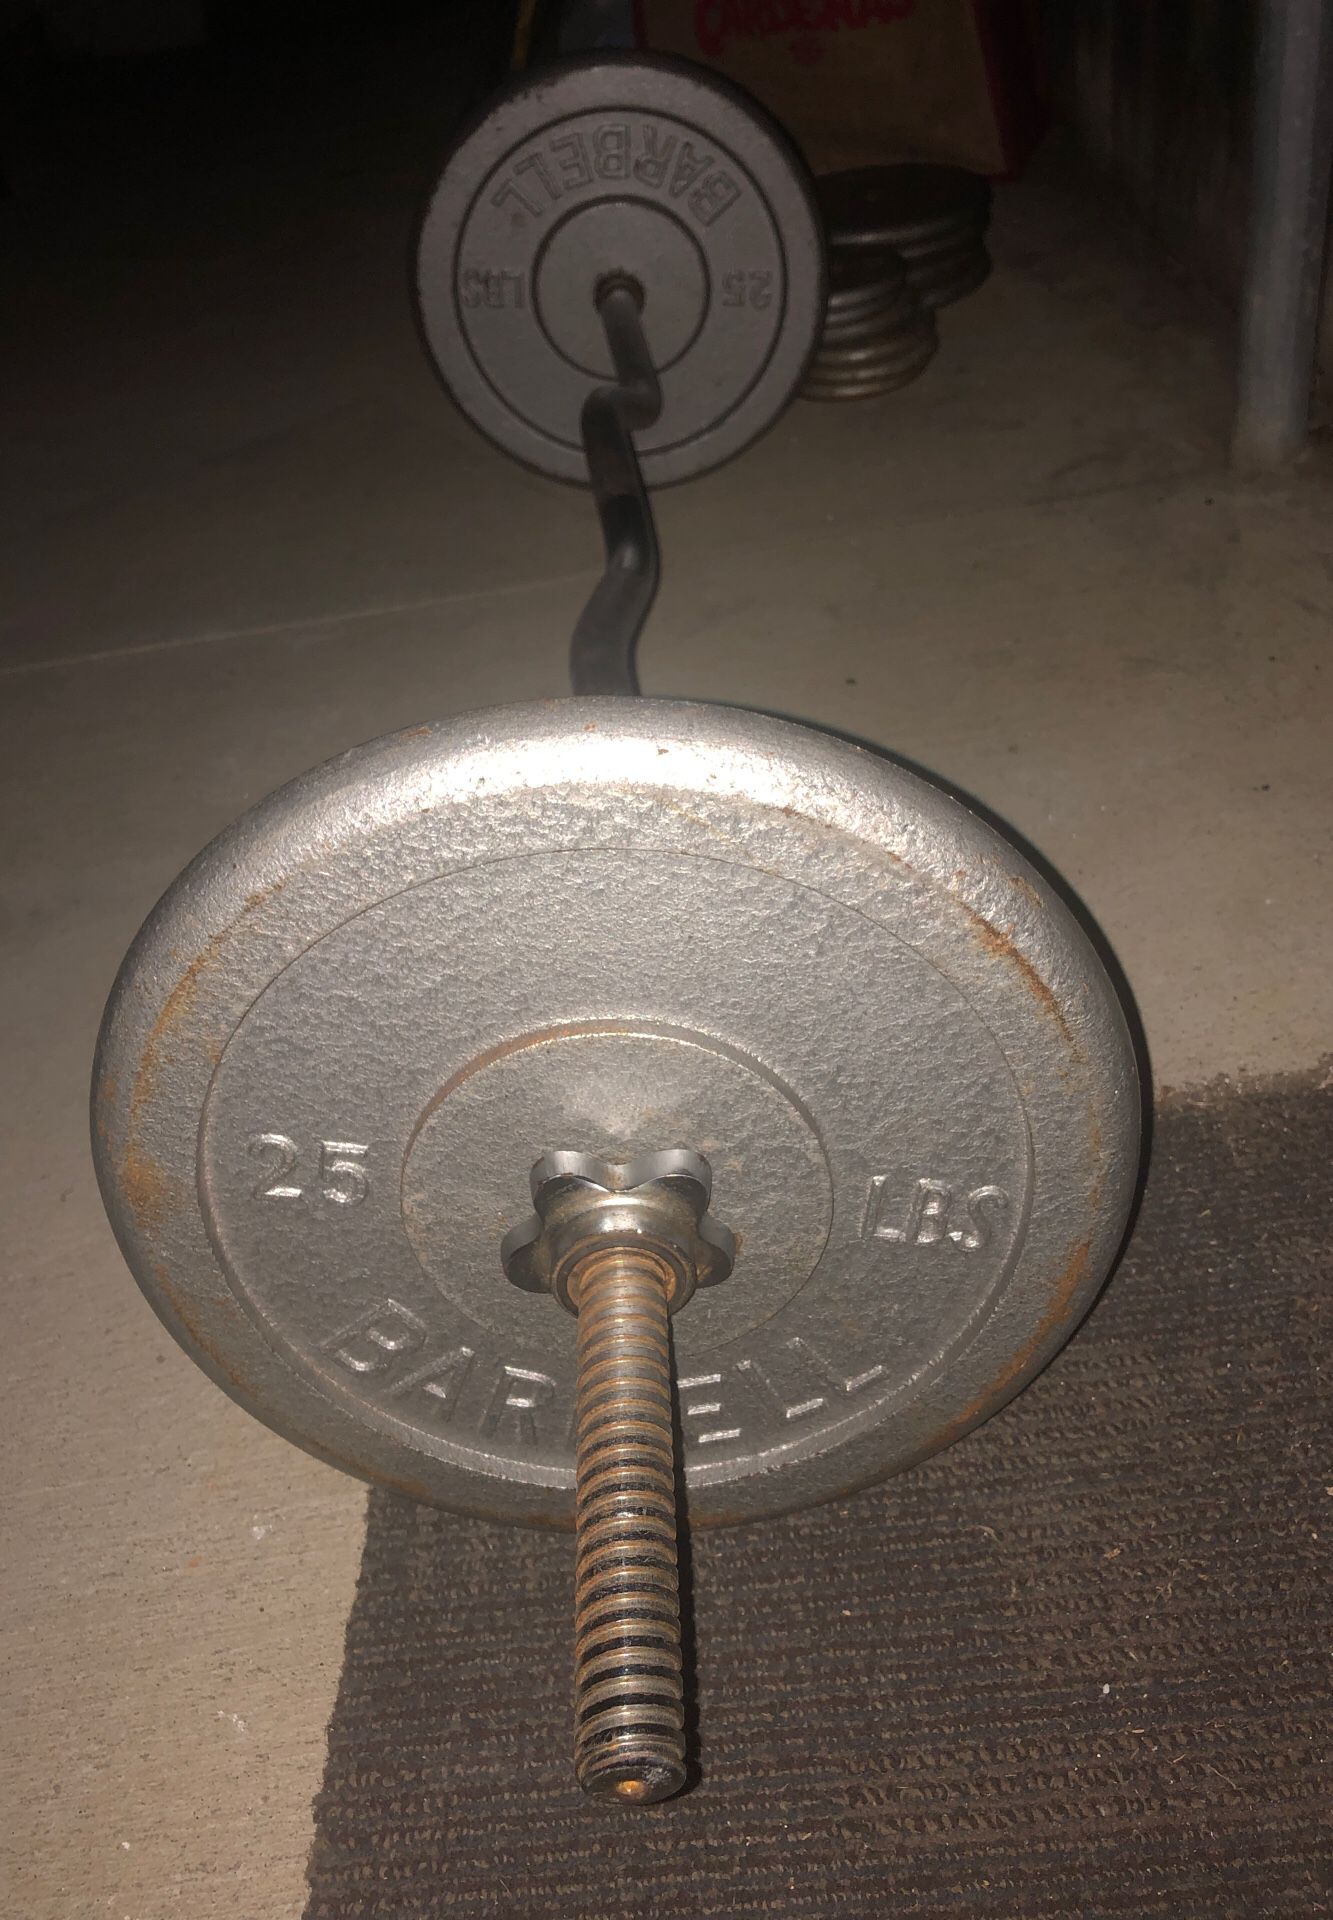 Olympic Curl Barbell with Weights included.